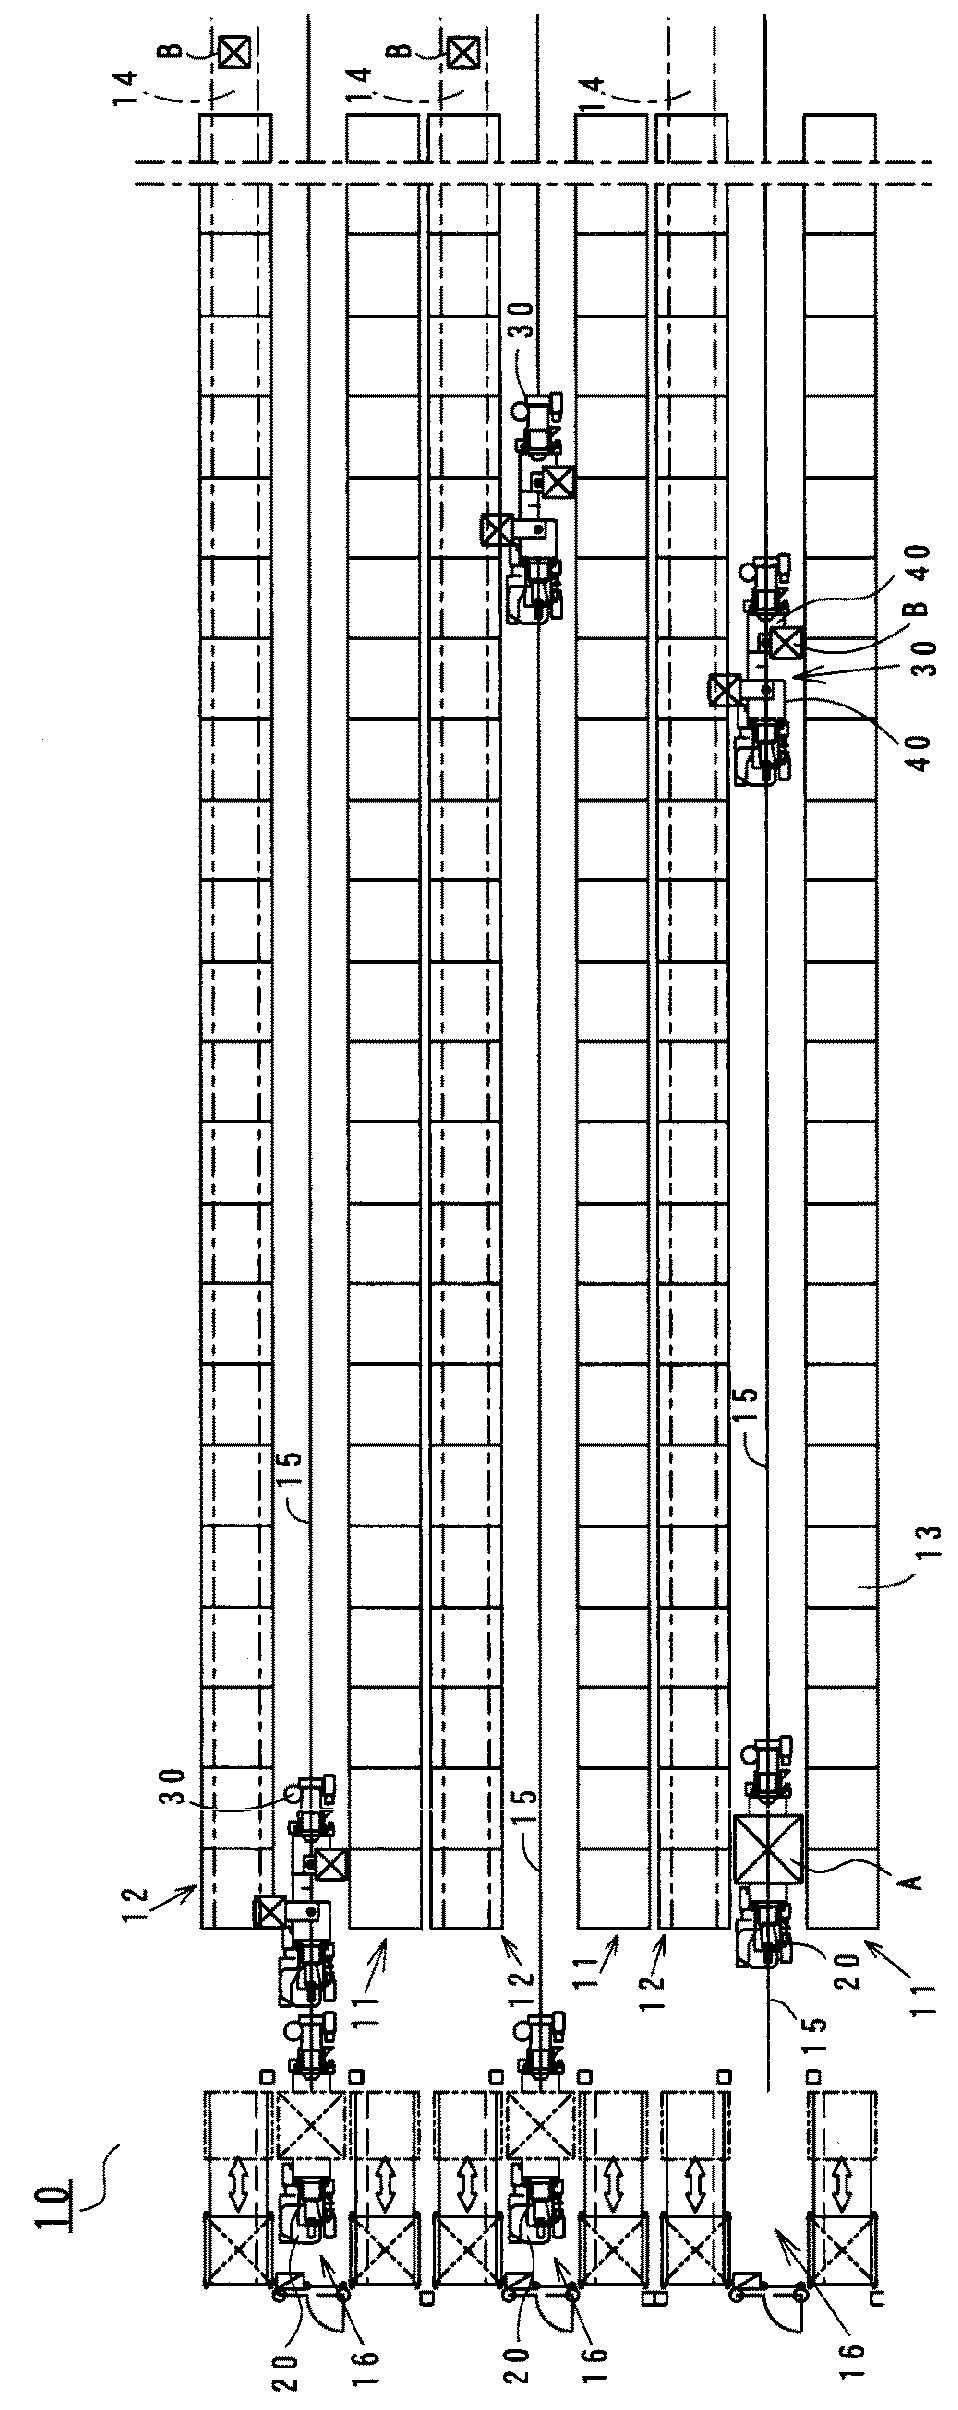 Automated storage and retrieval system for pallets and cases